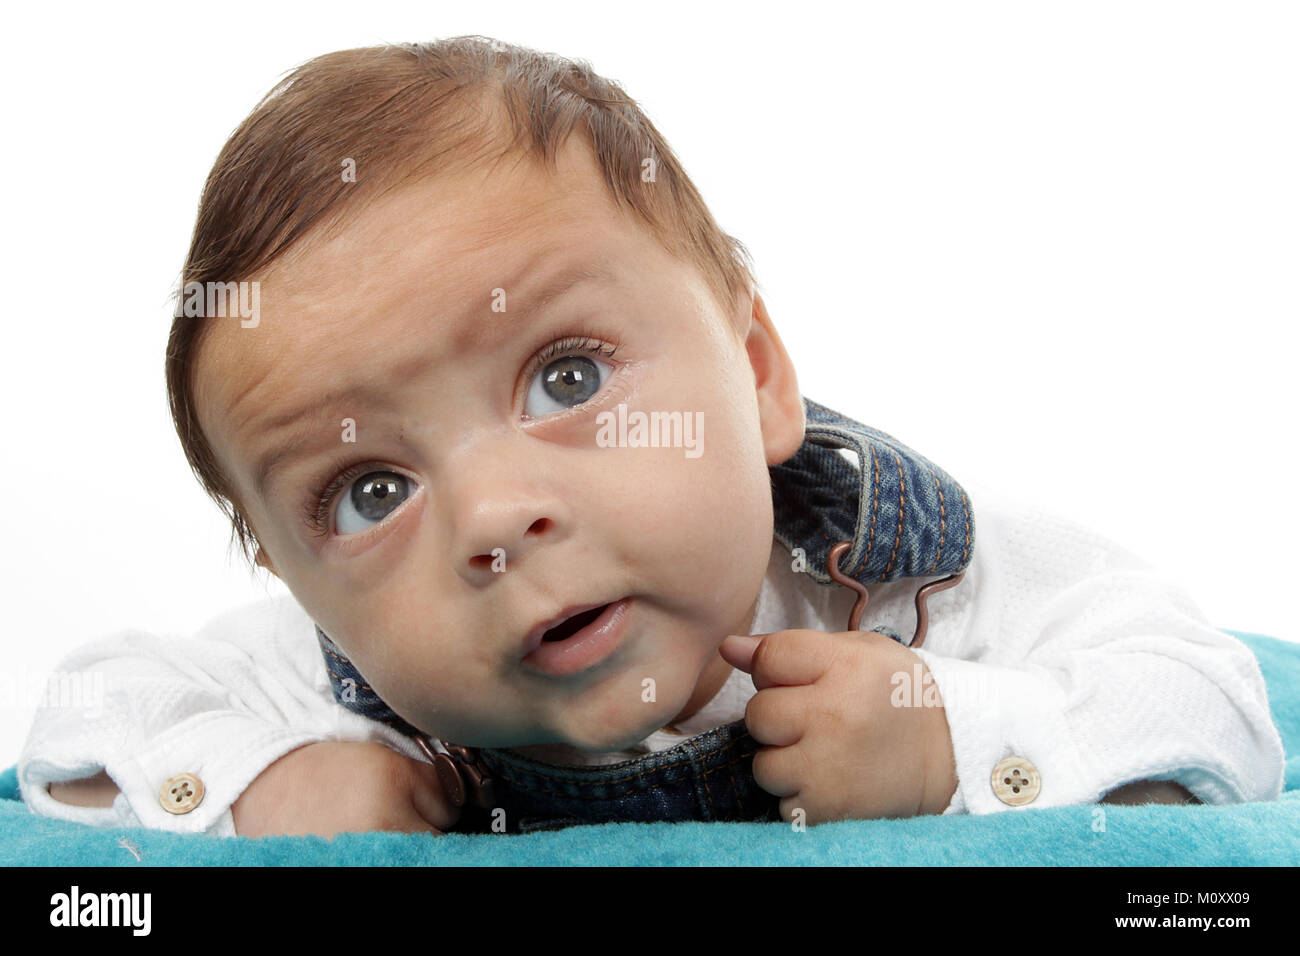 3 month old mixed race baby boy playing on a rug Stock Photo